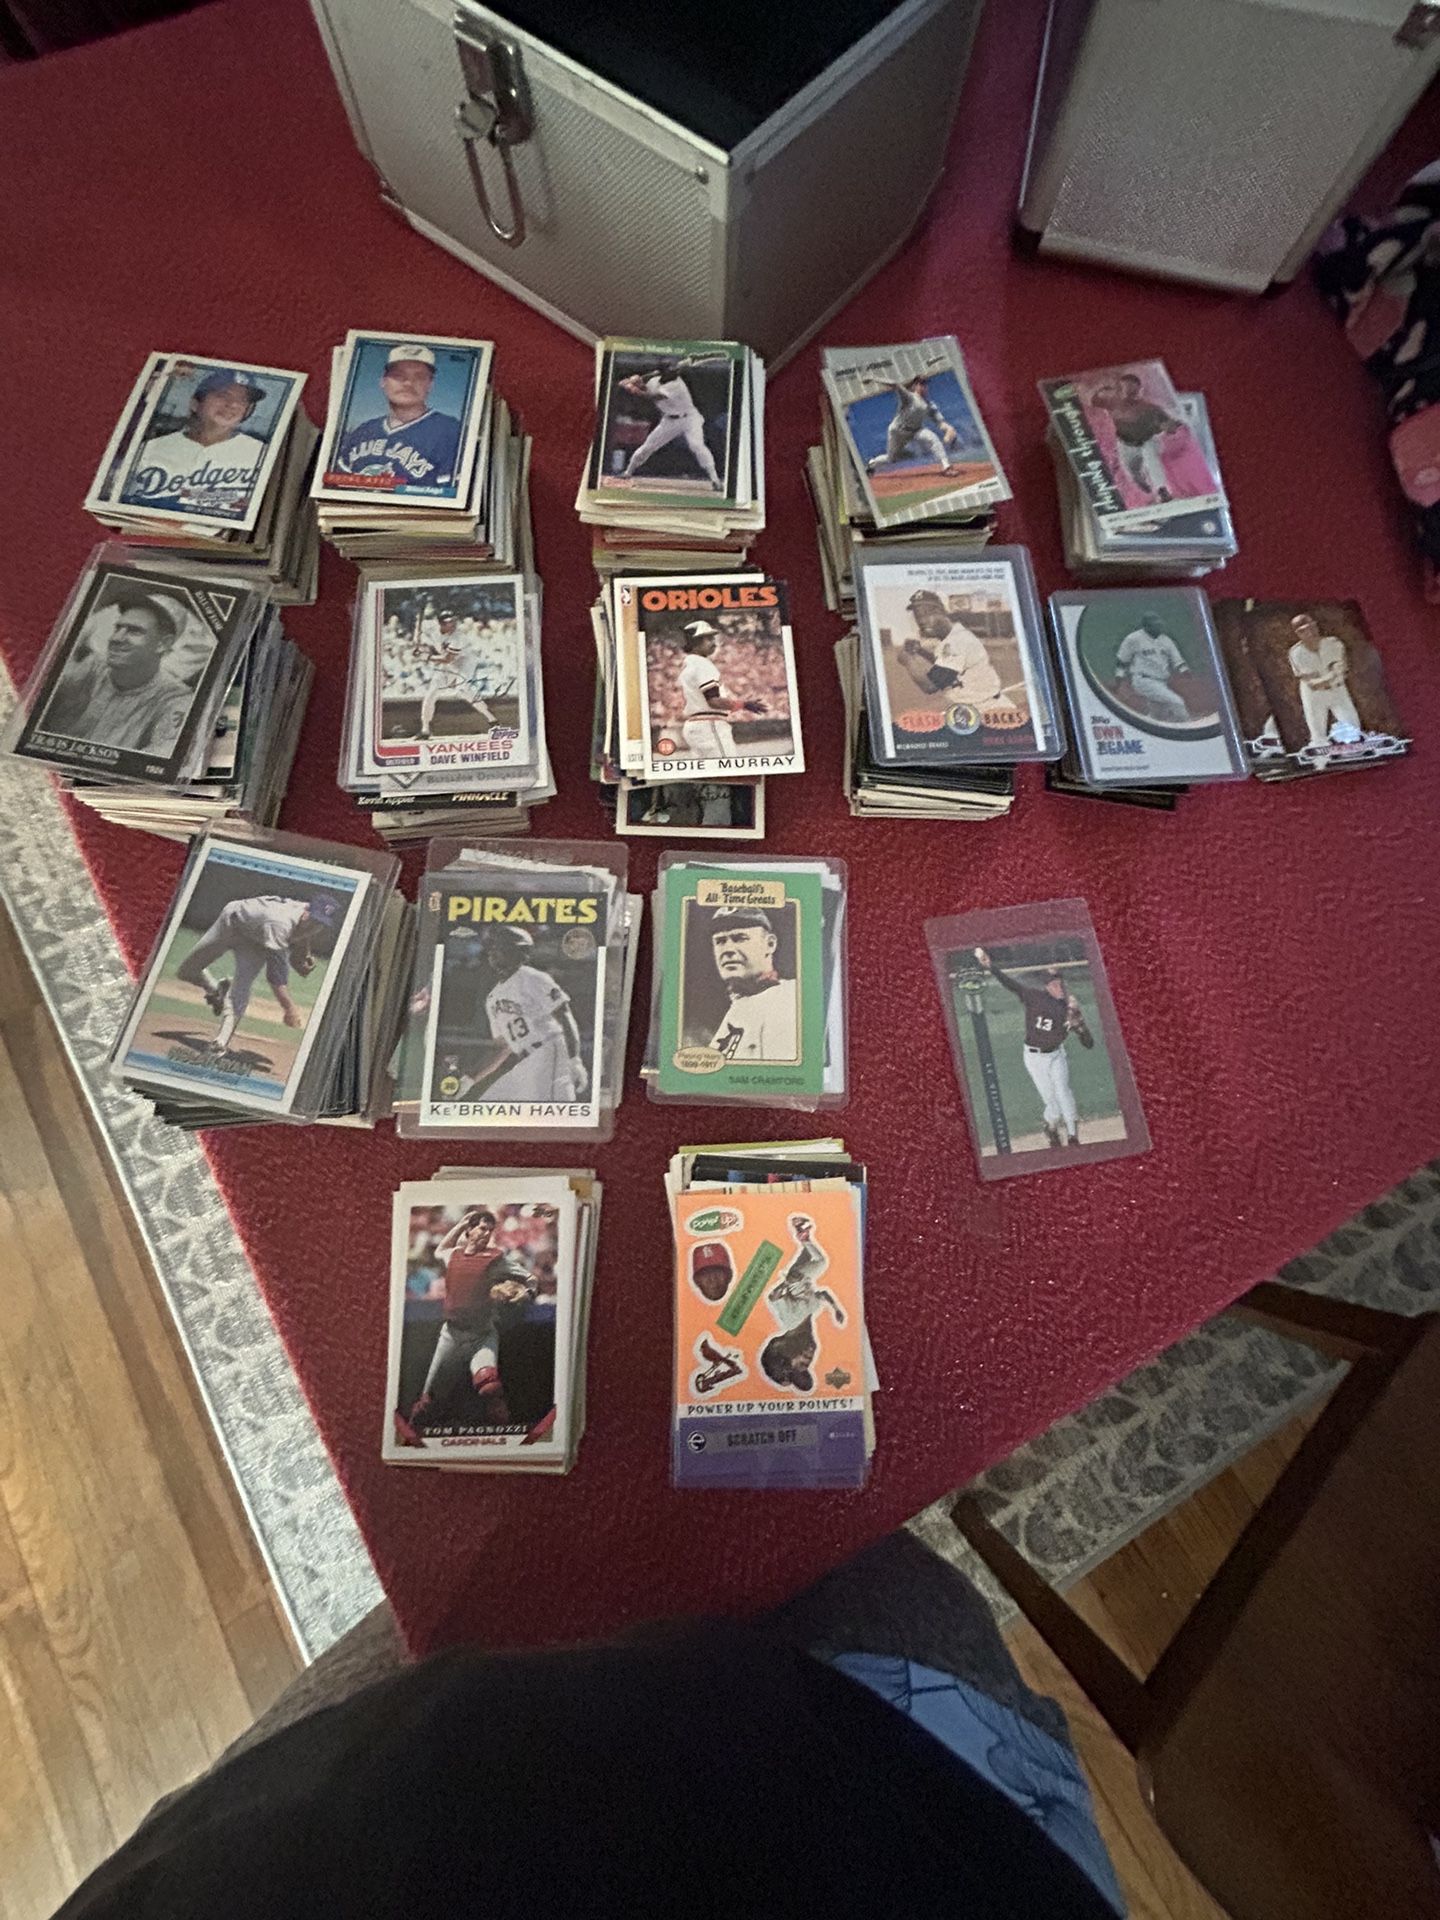 vintage collectable baseball cards (RARE CARDS) 